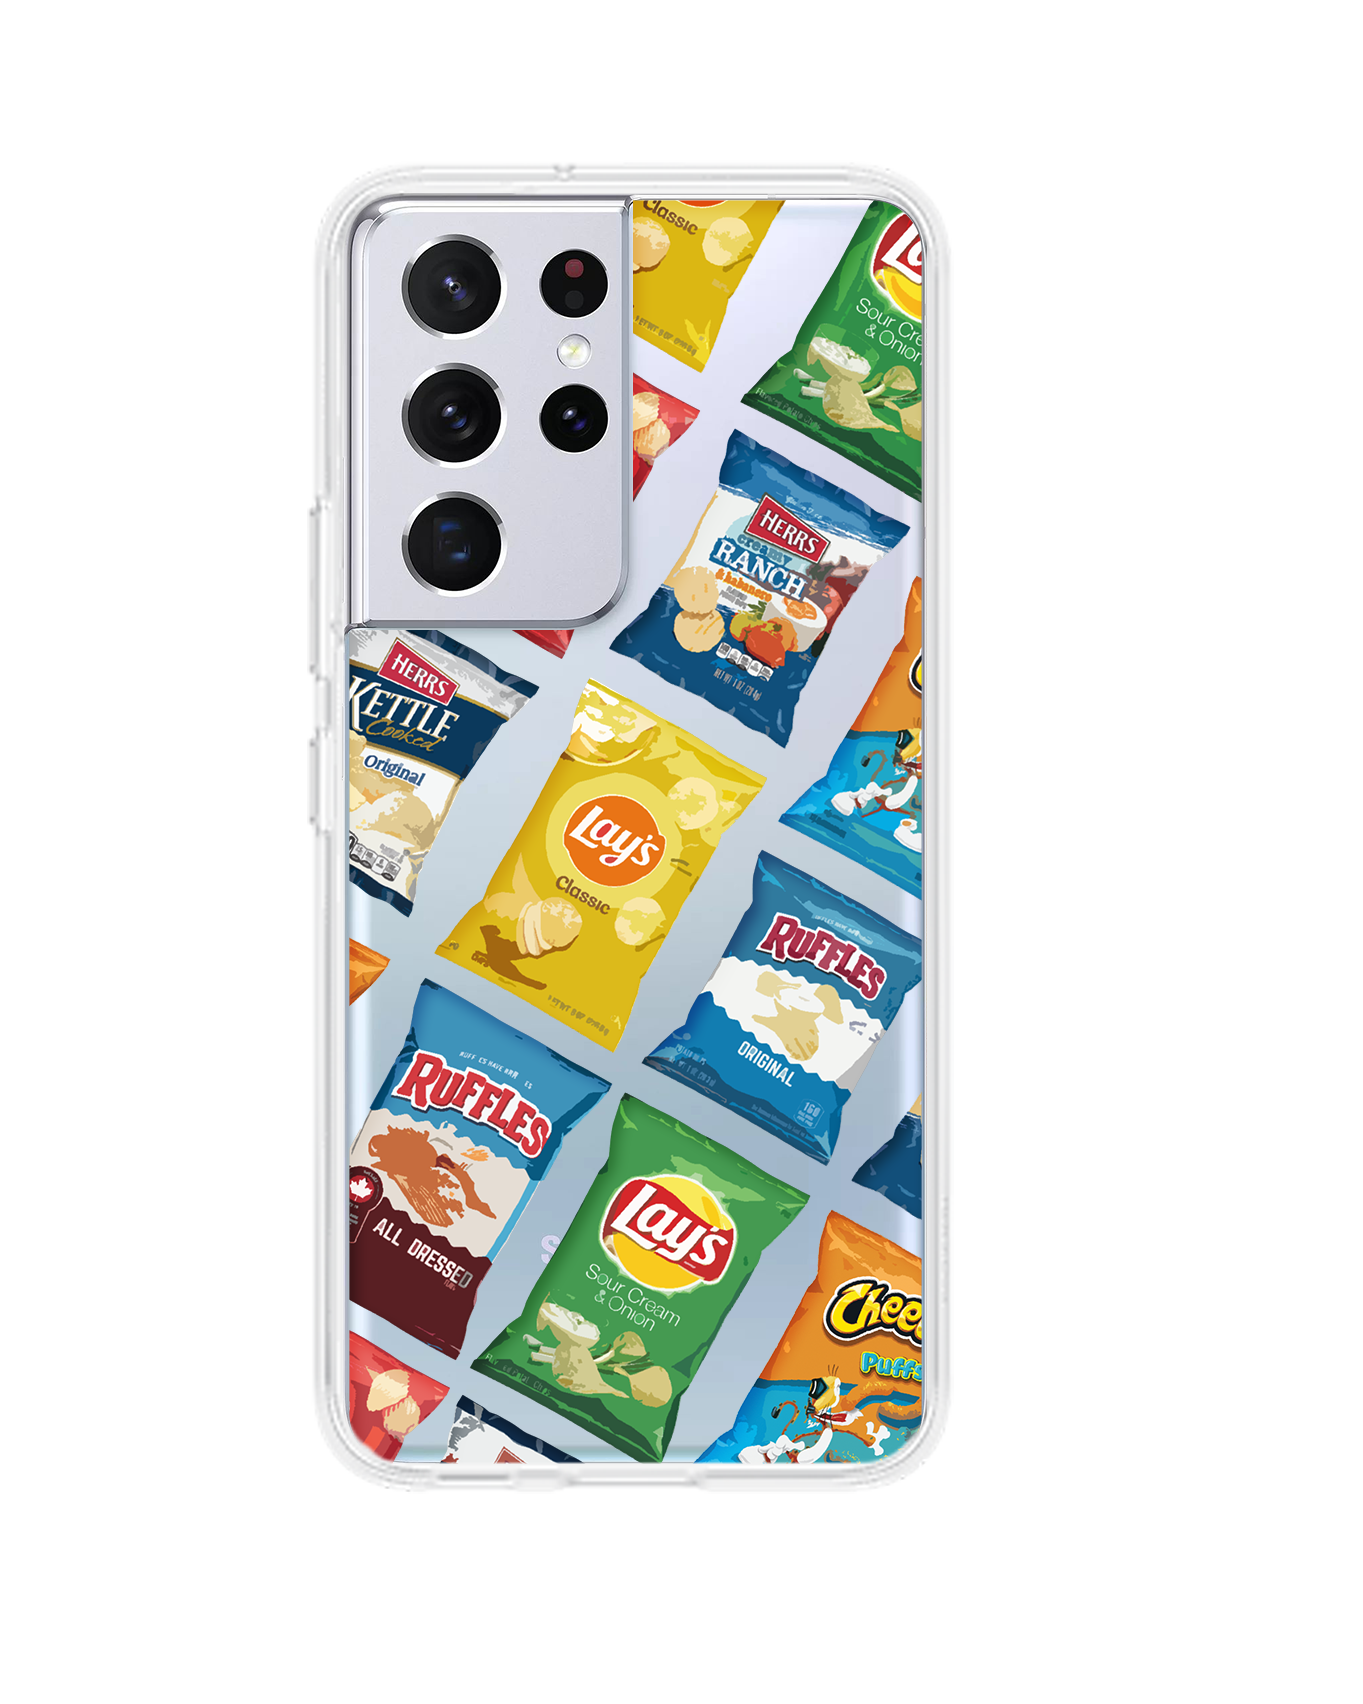 Android Rearguard Hybrid Case - Crisps